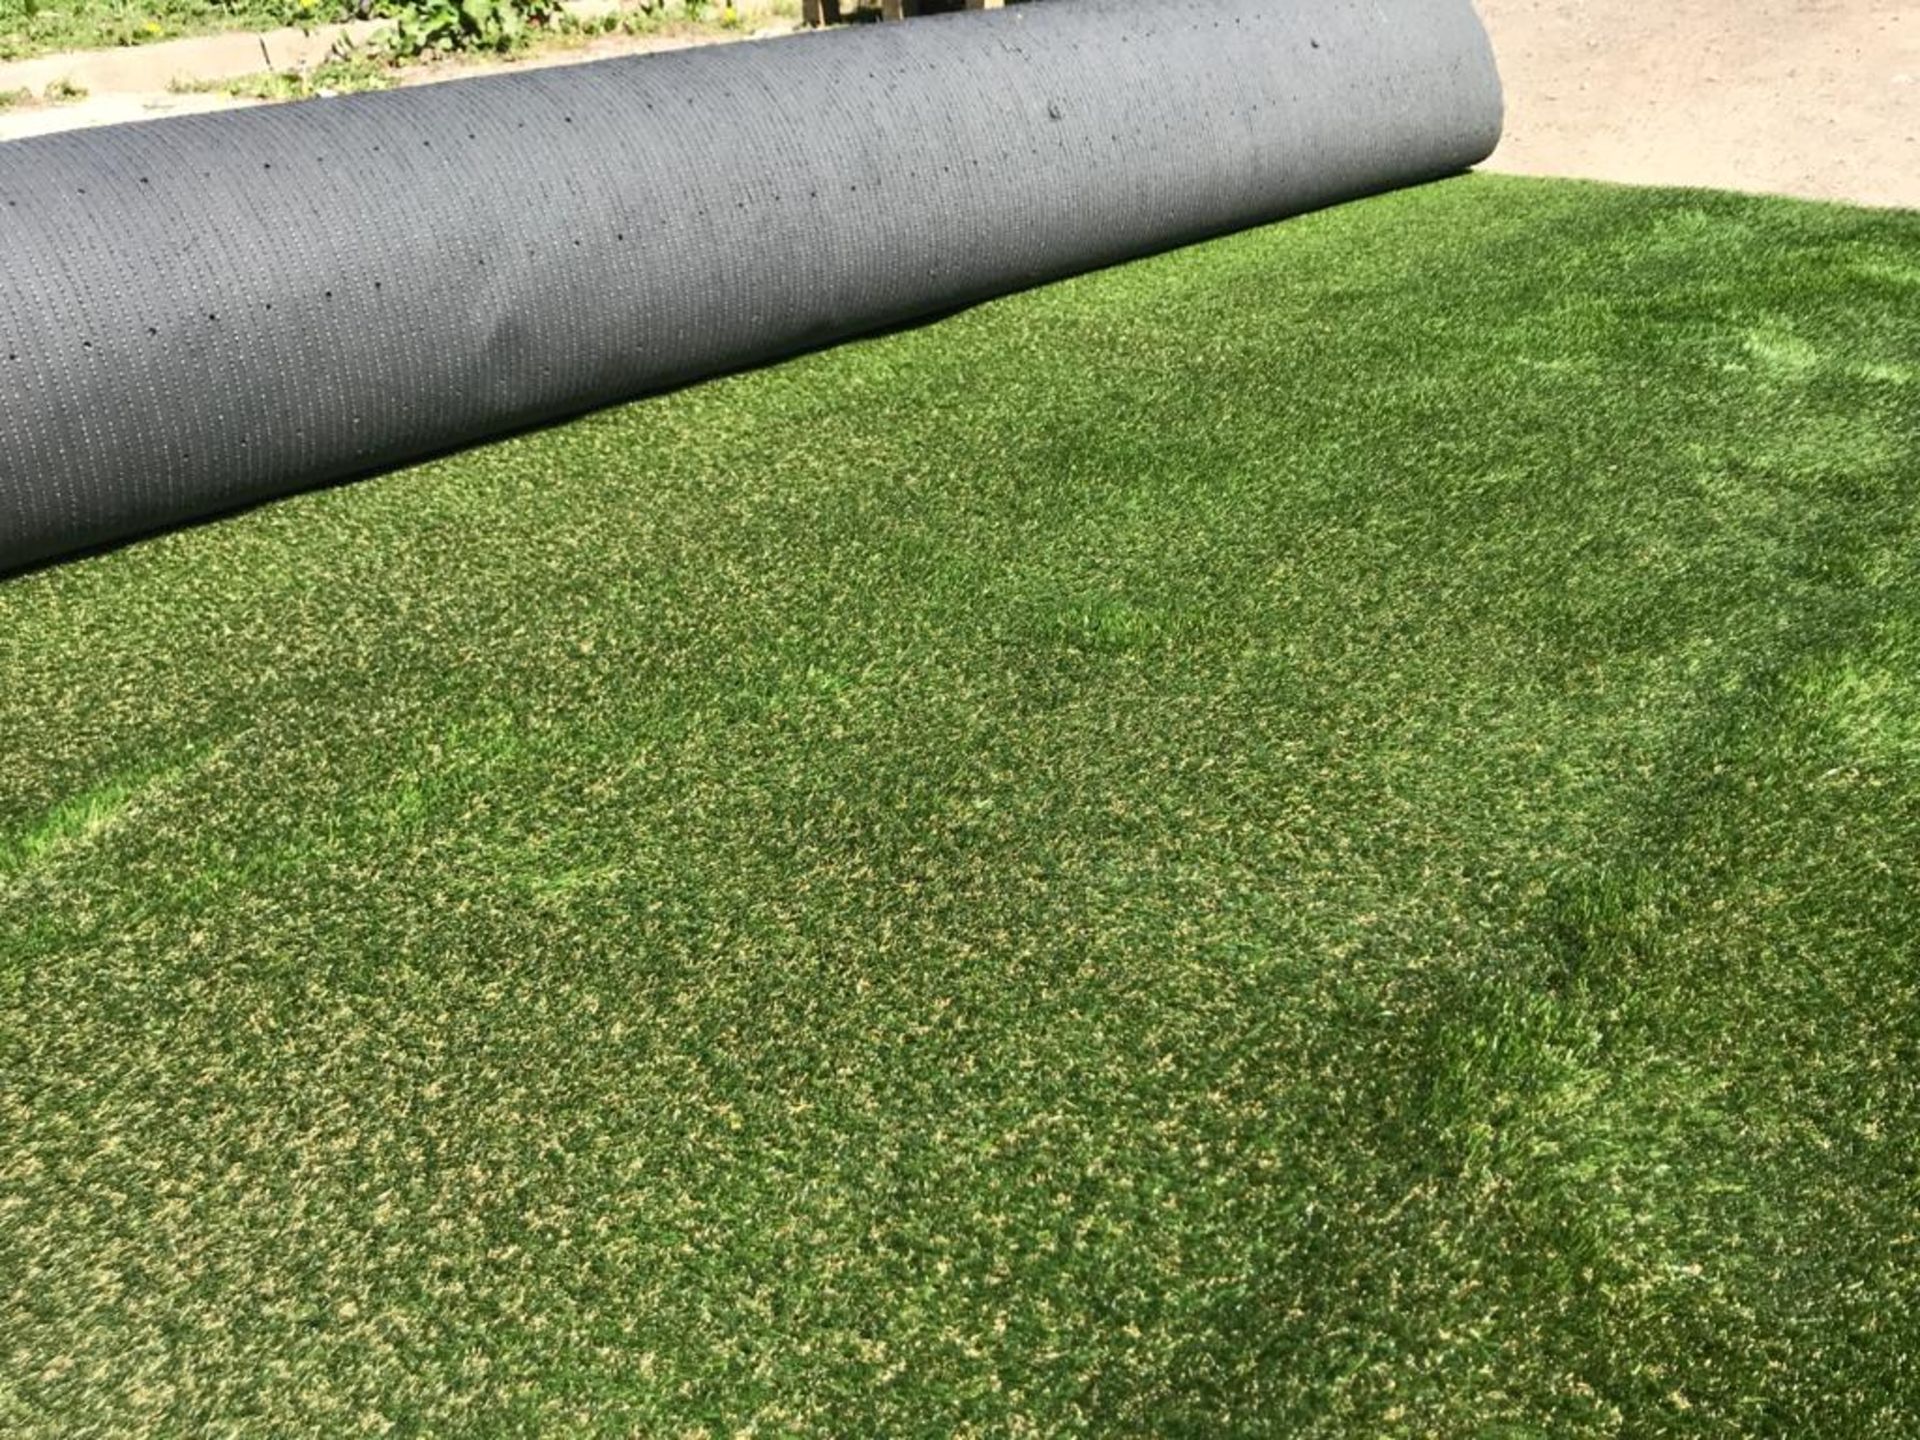 25x4m roll Artificial grass 35mm - Image 5 of 5